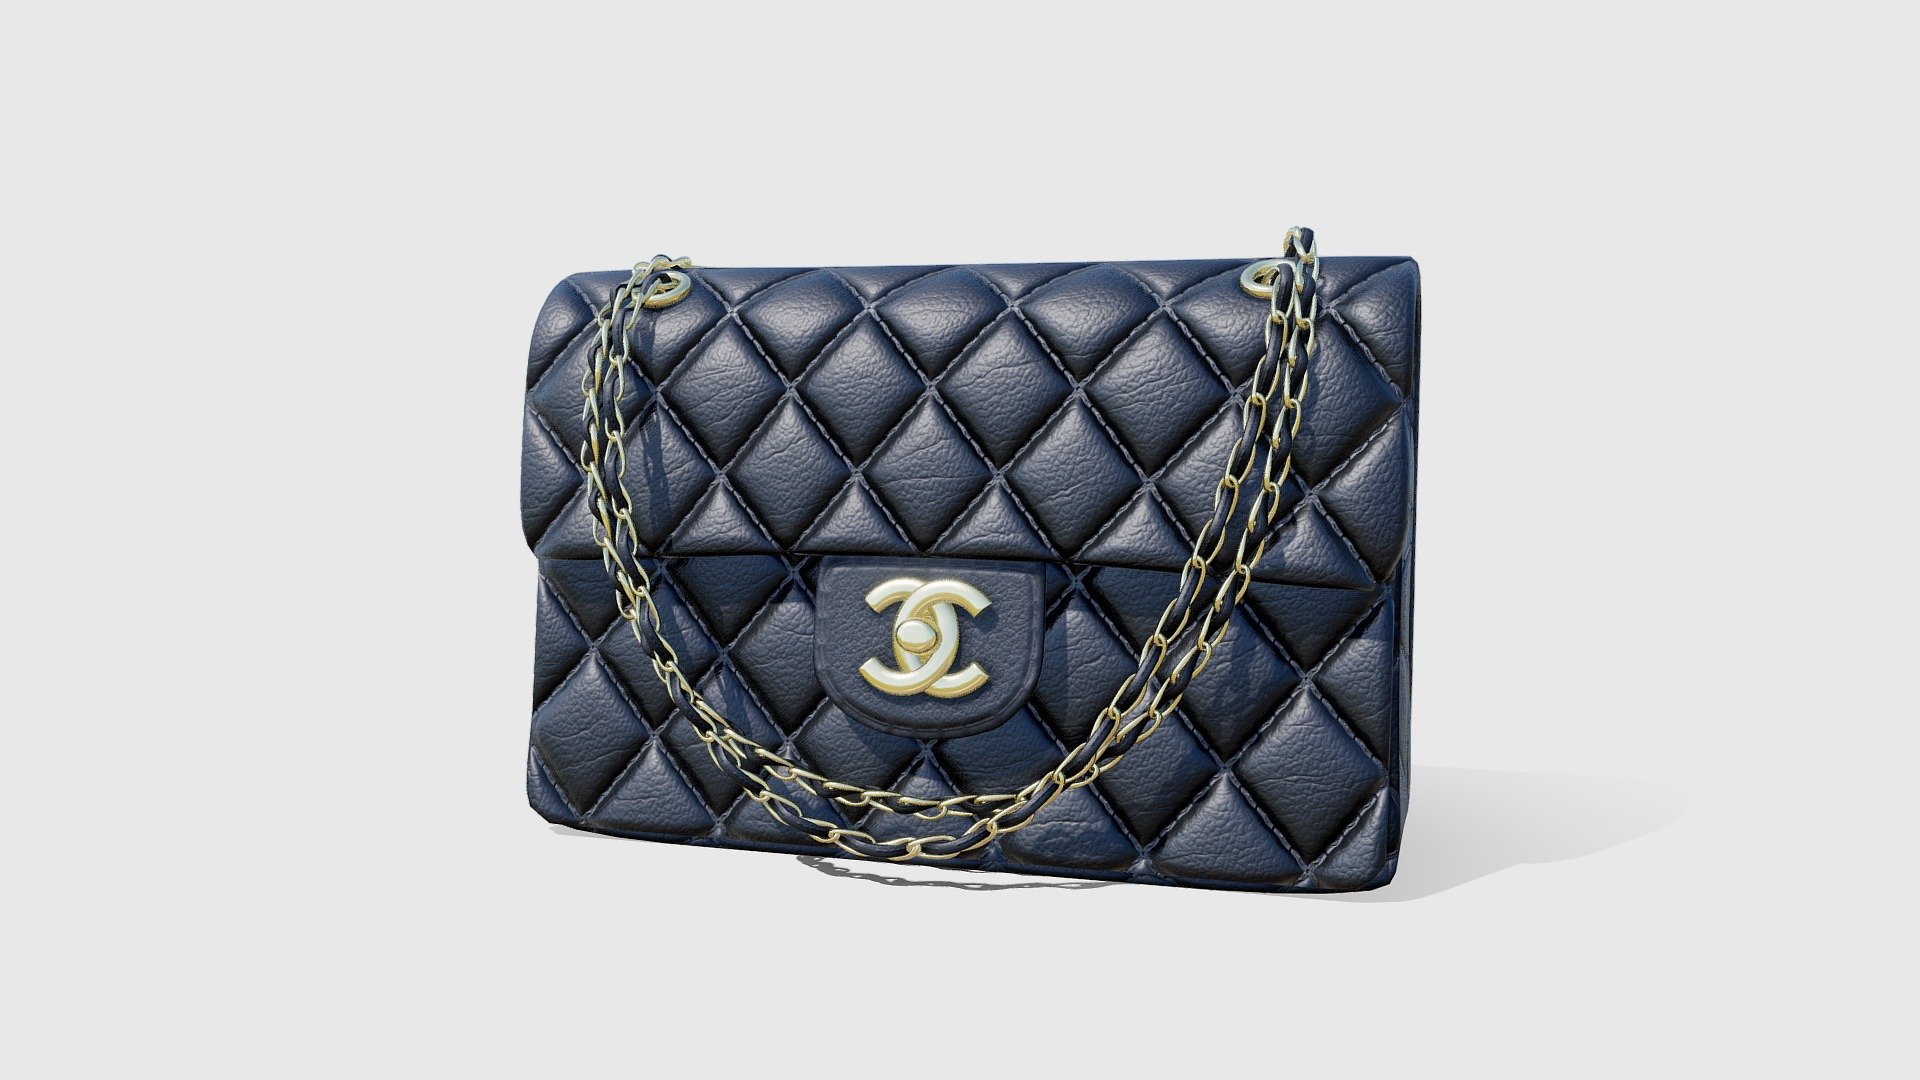 Check out our website for more products and better deals! 👉 SM5 by Heledahn 👈


This beautiful Chanel Bag is perfect for adding a touch of luxury to your 3D life! With this lowpoly 3D models with PBR textures in all the popular formats, you can get high-class style without breaking the bank. Get your virtual hands on this chic bag today!

🔹The chain is animable and customizable (curve guide)
🔹Textures come in 8K for perfect closeups.

This product will achieve realistic results in your rendering projects, being greatly suited for close-ups due to their high quality topology and PBR shading 3d model